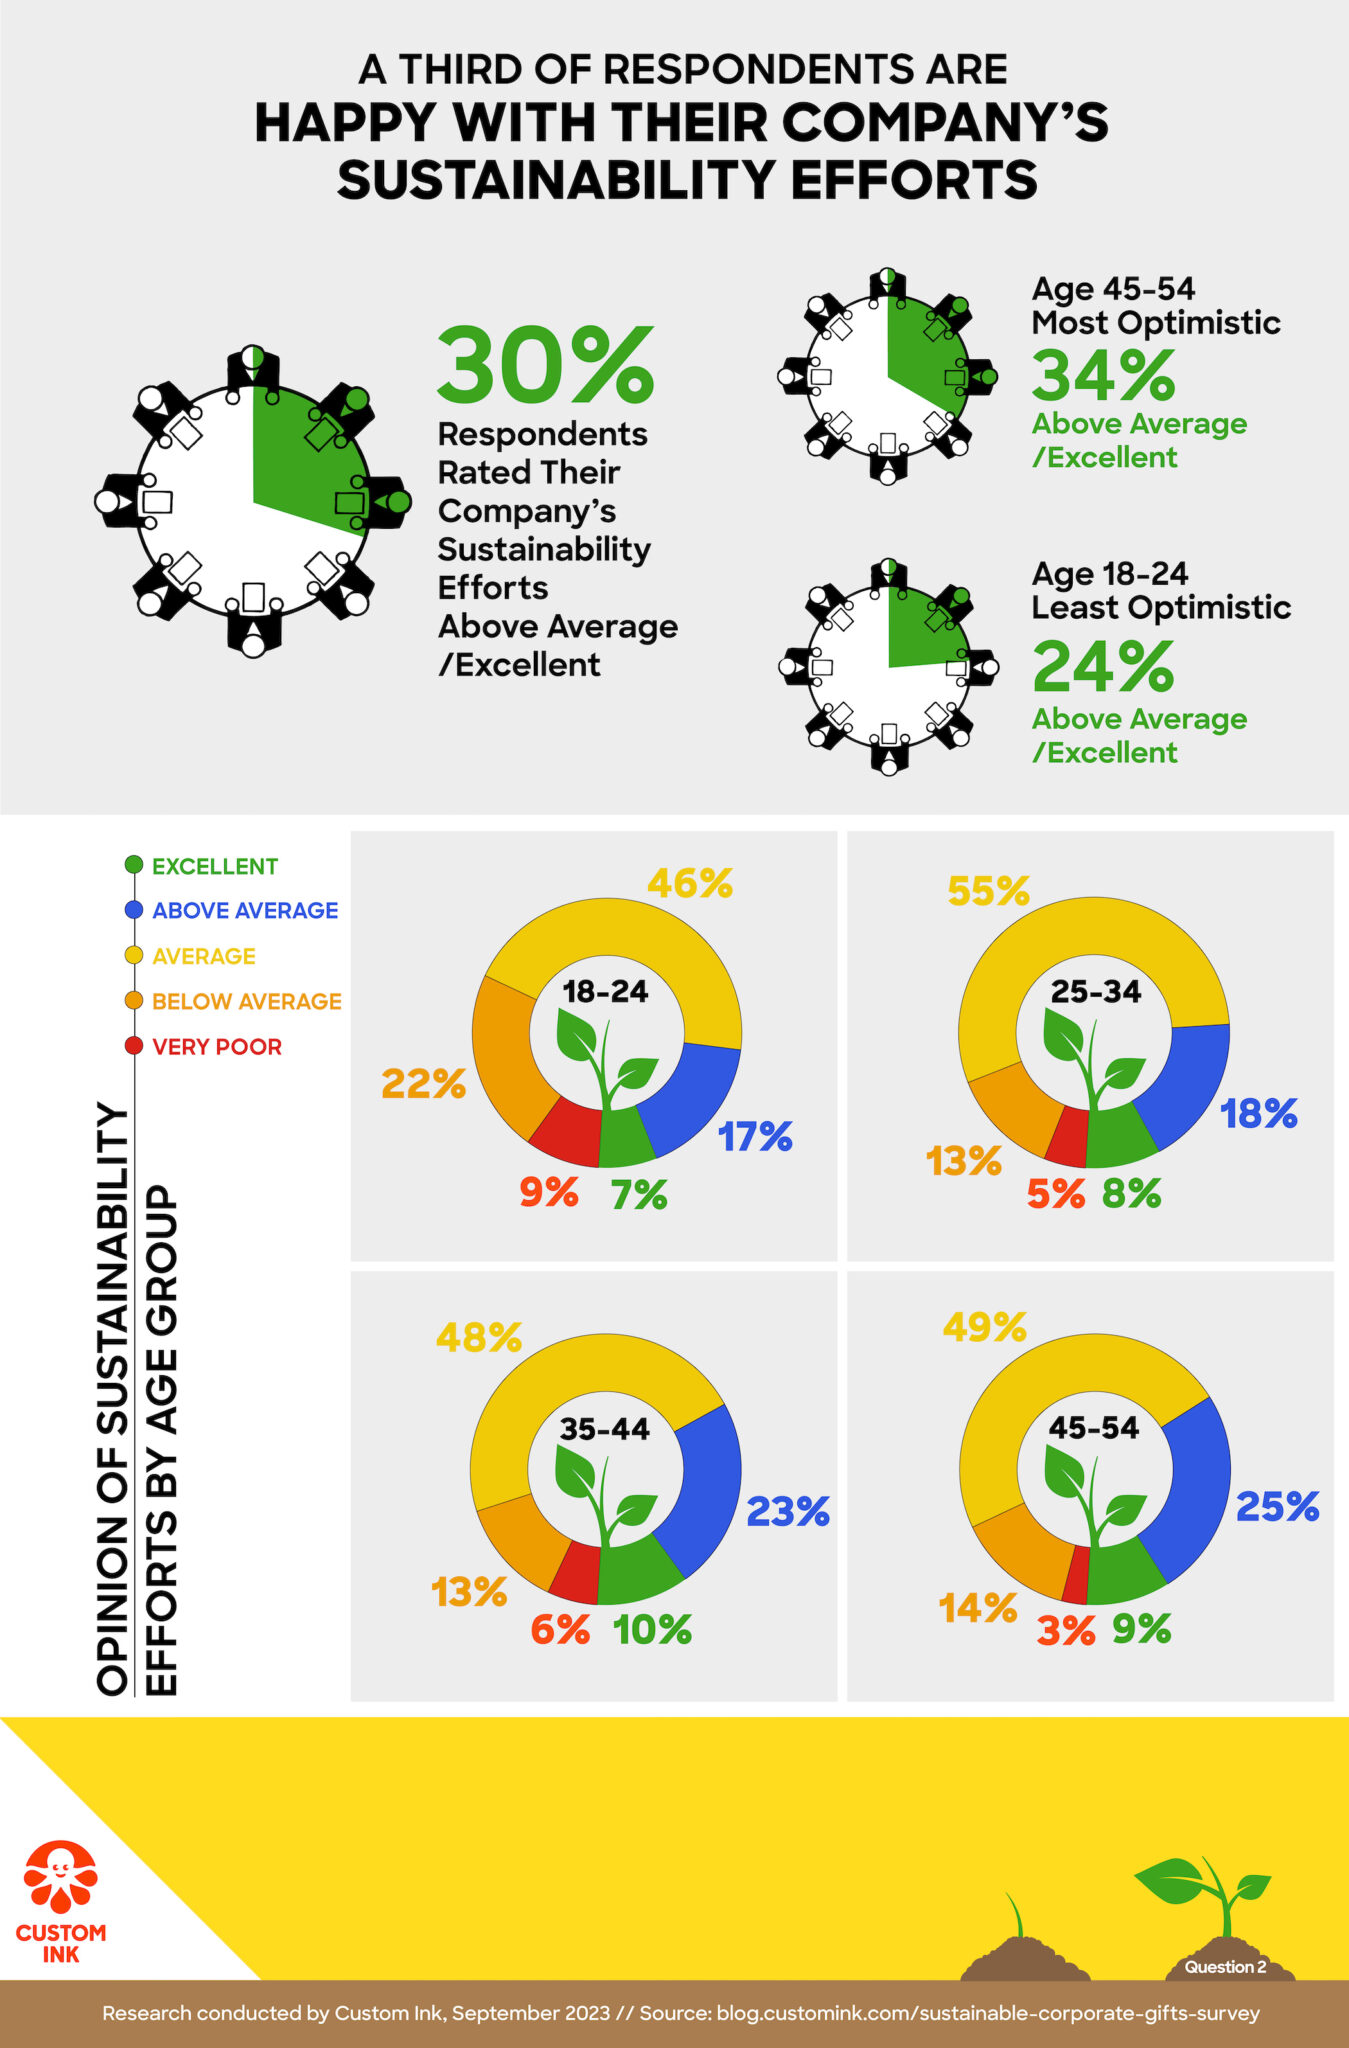 An infographic titled “A Third of Respondents Are Happy With Their Company’s Sustainability Efforts” displaying three pie charts at the top. The first pie chart indicates 30% of respondents rated their company’s sustainability efforts as above average/excellent. The second indicates that respondents aged 45-54 were the most optimistic about their company’s efforts with 34% rating them as above average/excellent. The third pie chart indicates that respondents aged 18-24 were the least optimistic with 24%. Beneath that are four pie charts displaying the opinion of sustainability efforts by age group: 18-24: Very Poor (9%), Below Average (22%), Average (46%), Above Average (17%), Excellent (7%) 25-34: Very Poor (5%), Below Average (13%), Average (55%), Above Average (18%), Excellent (8%) 35-44: Very Poor (6%), Below Average (13%), Average (48%), Above Average (23%), Excellent (10%) 45-54: Very Poor (3%), Below Average (14%), Average (49%), Above Average (25%), Excellent (9%)